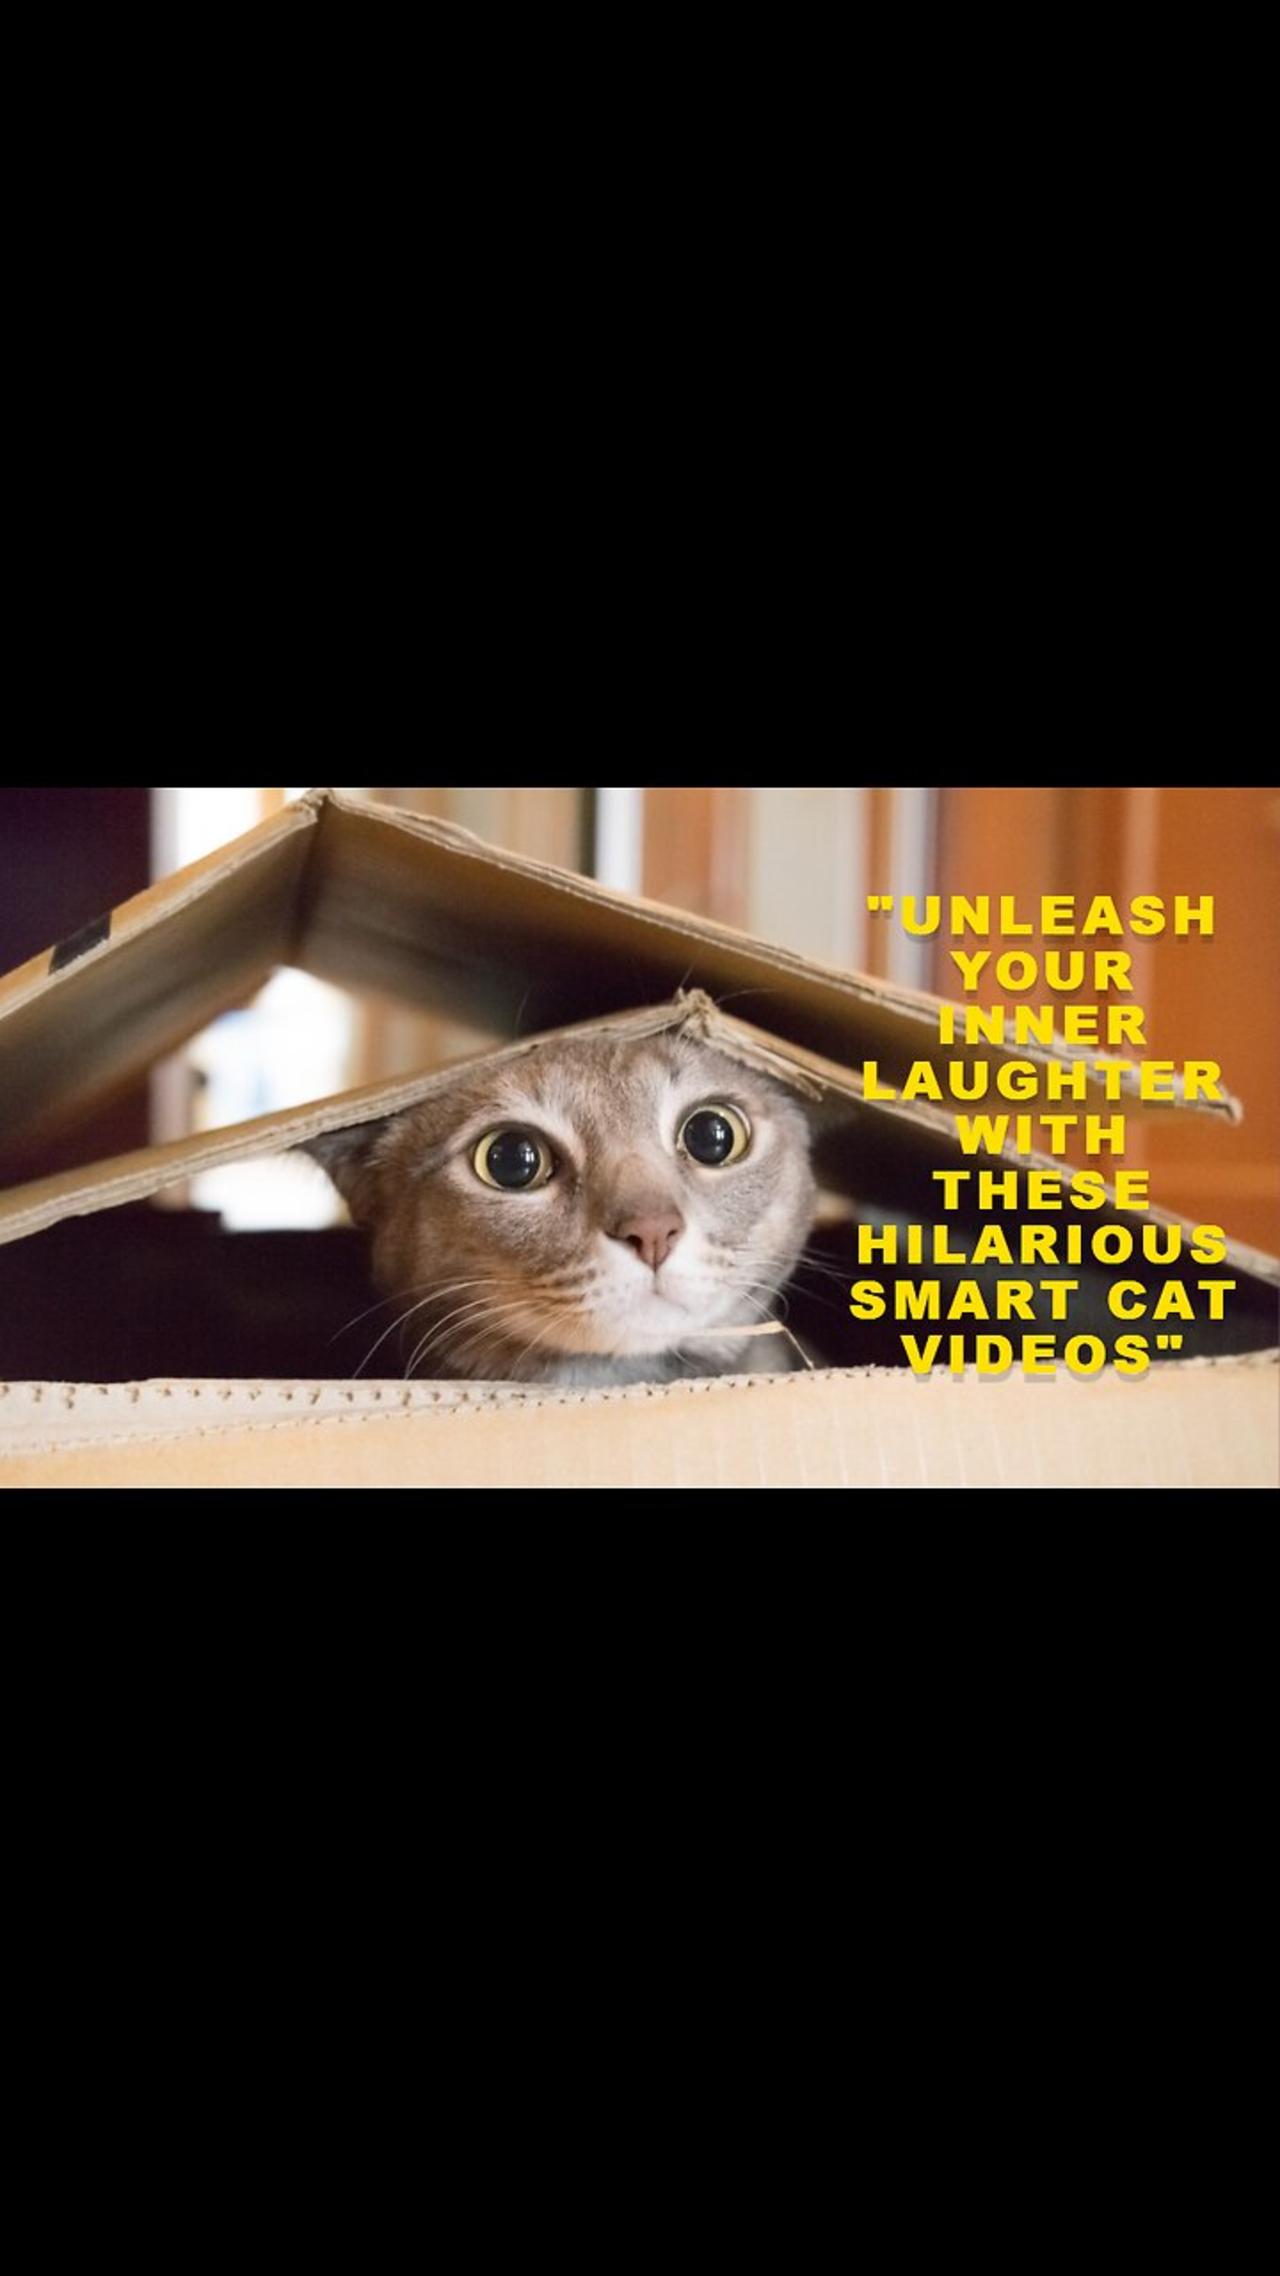 "Unleash Your Inner Laughter with These Hilarious Smart Cat Videos"